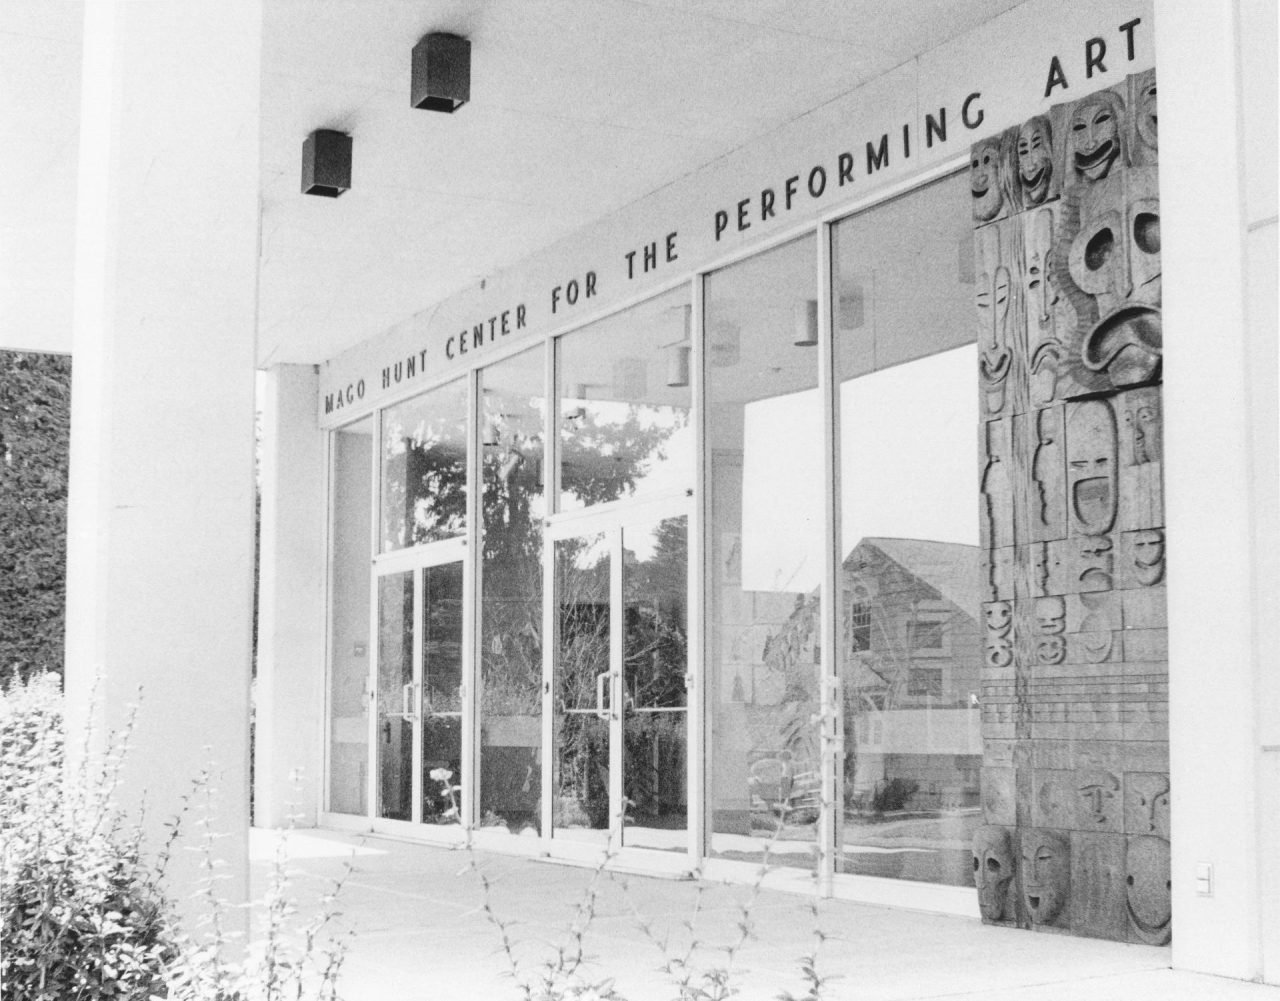 Front doors of Mago Hunt Center for the Performing Arts with carved wooden drama masks on the side panel.